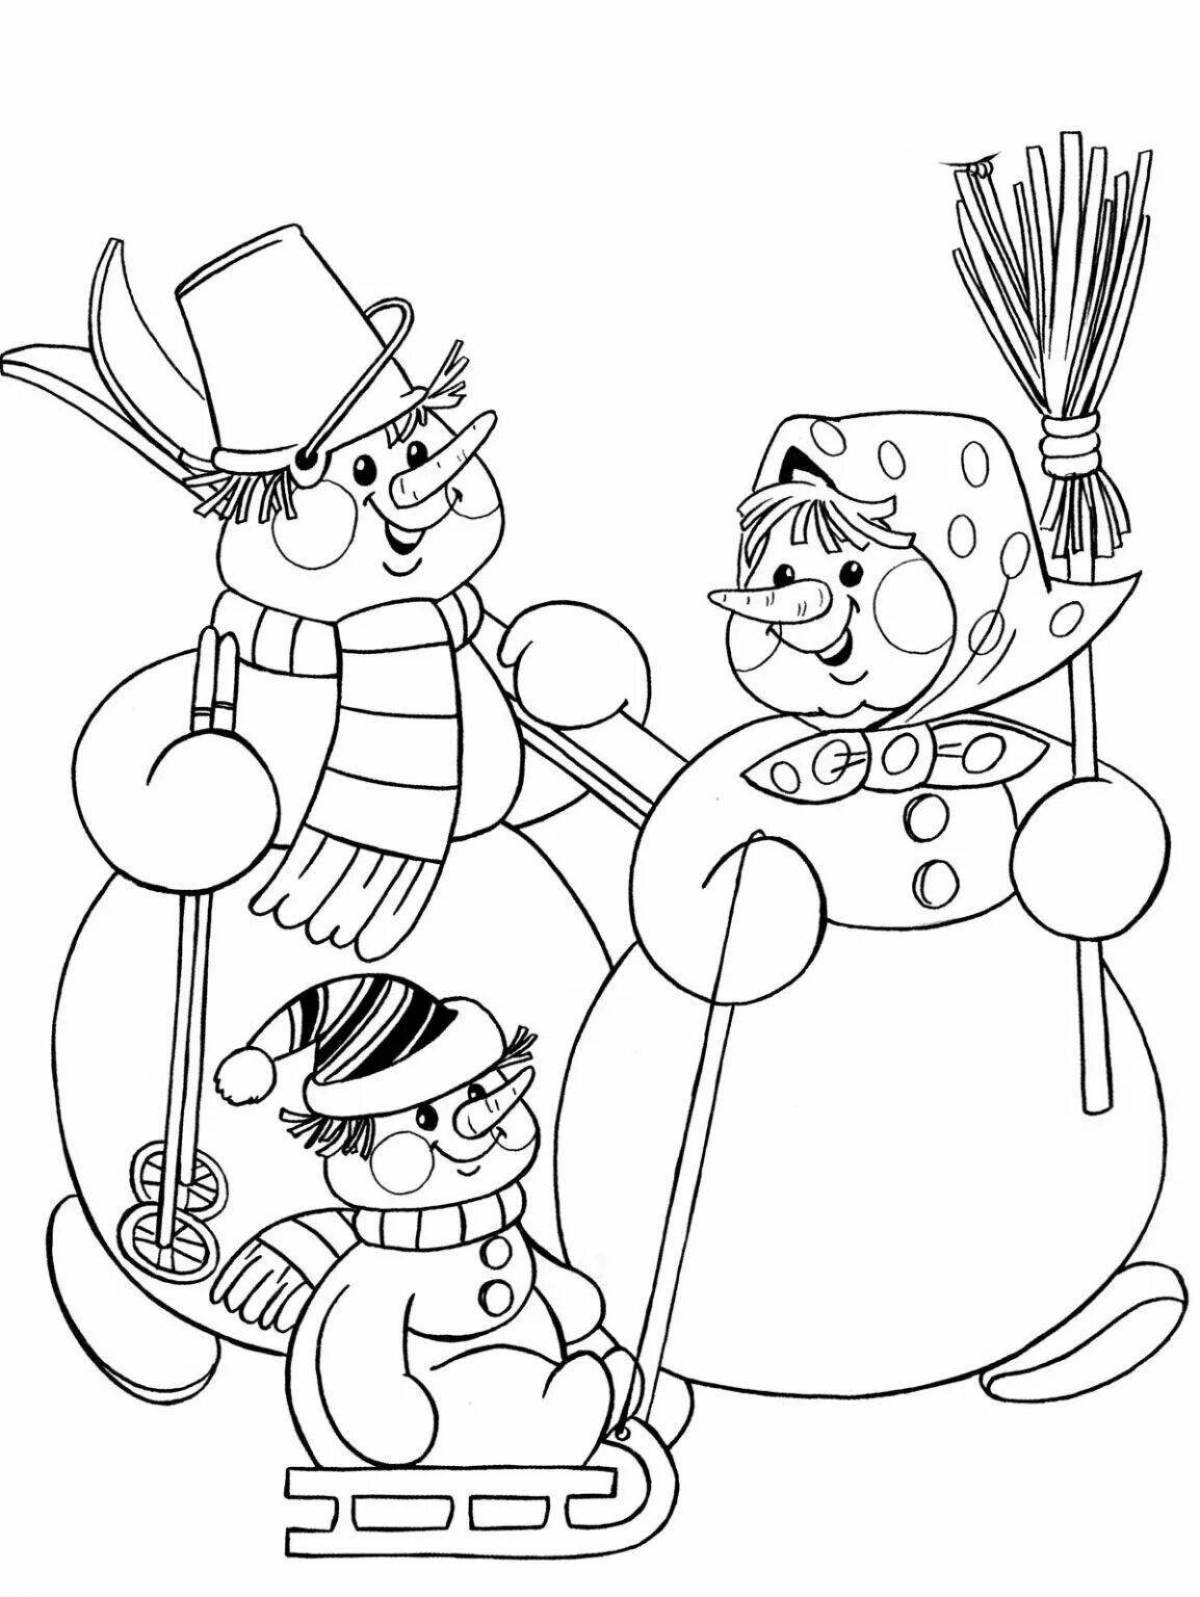 Glitter Christmas snowman coloring book